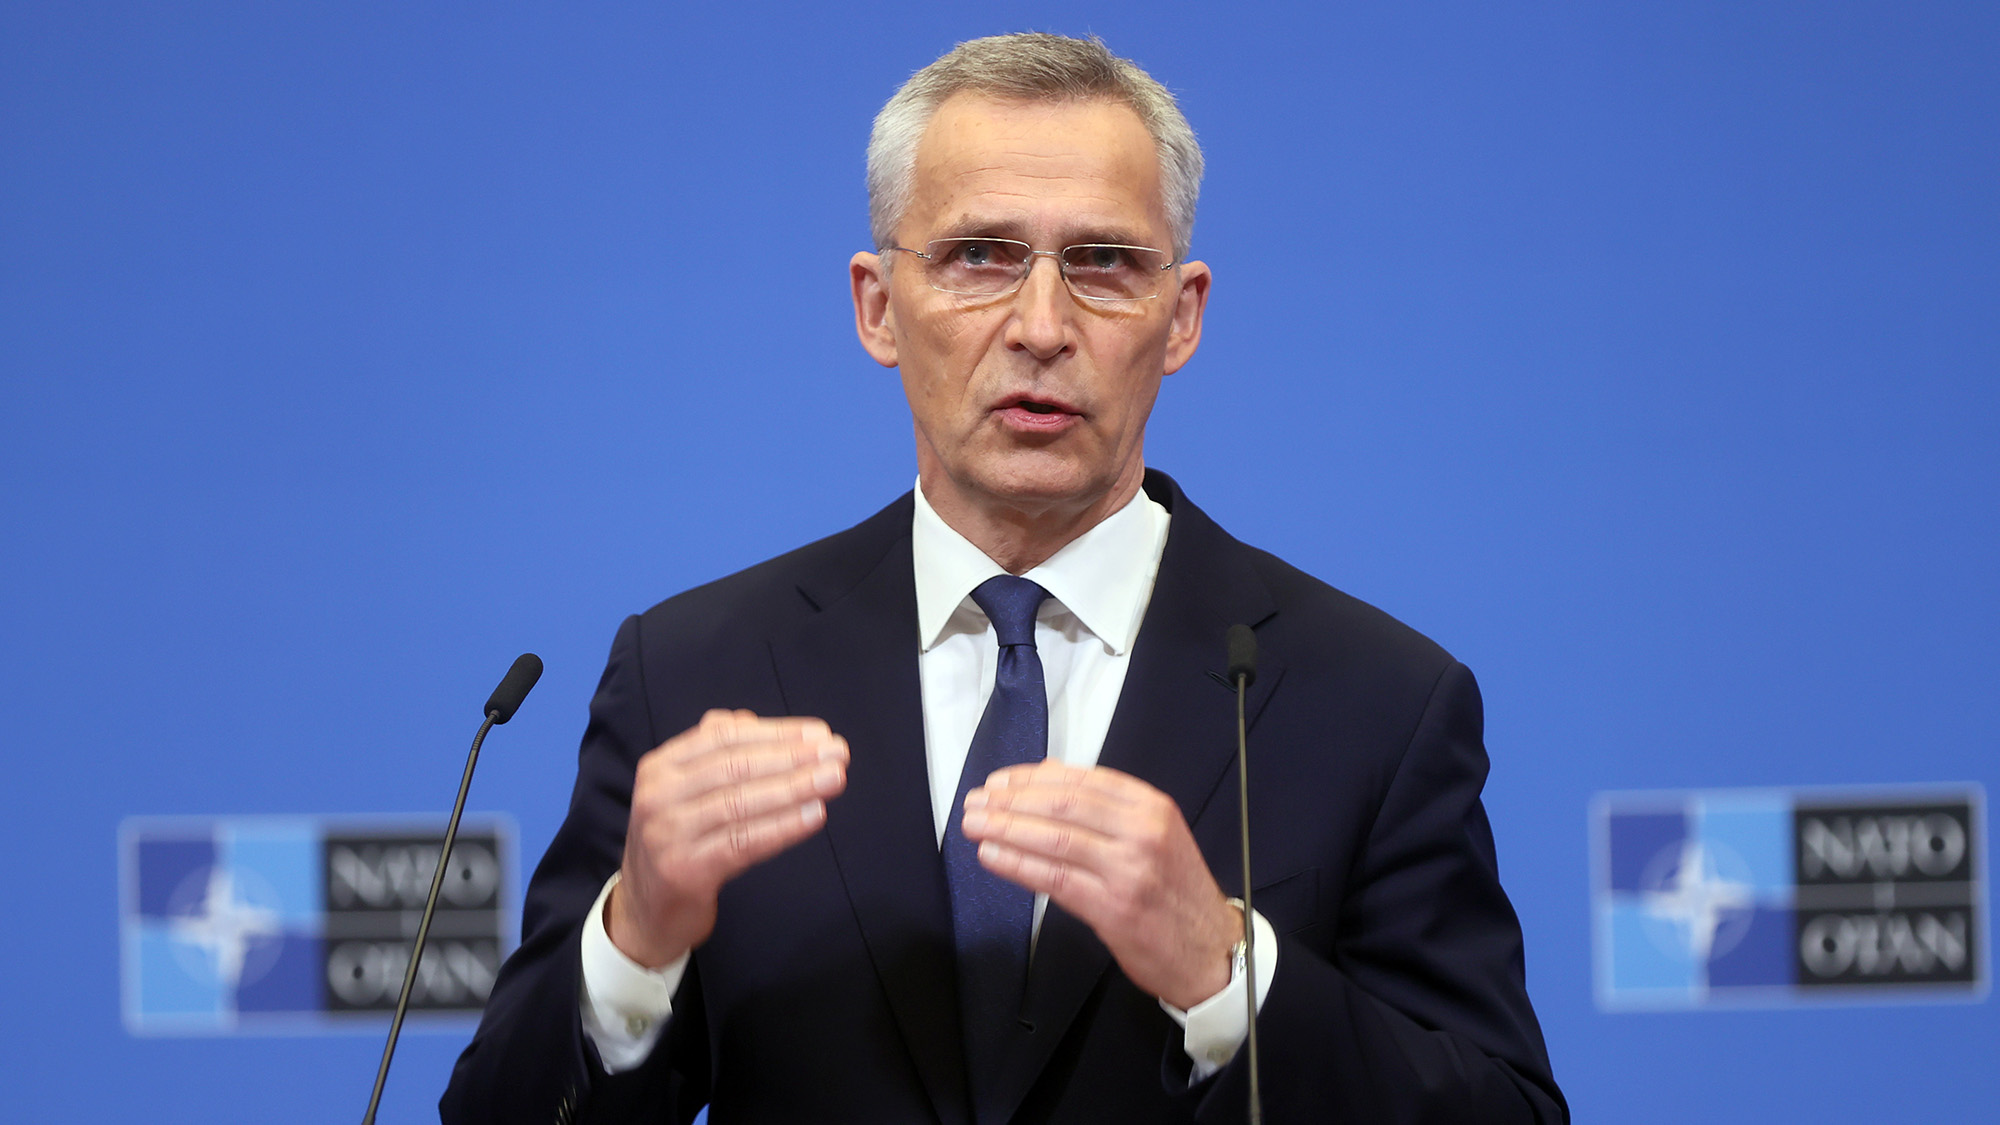 NATO Secretary General Jens Stoltenberg speaks during a press conference after the Extraordinary Summit of NATO Heads of State and Government in Brussels, Belgium on March 24.